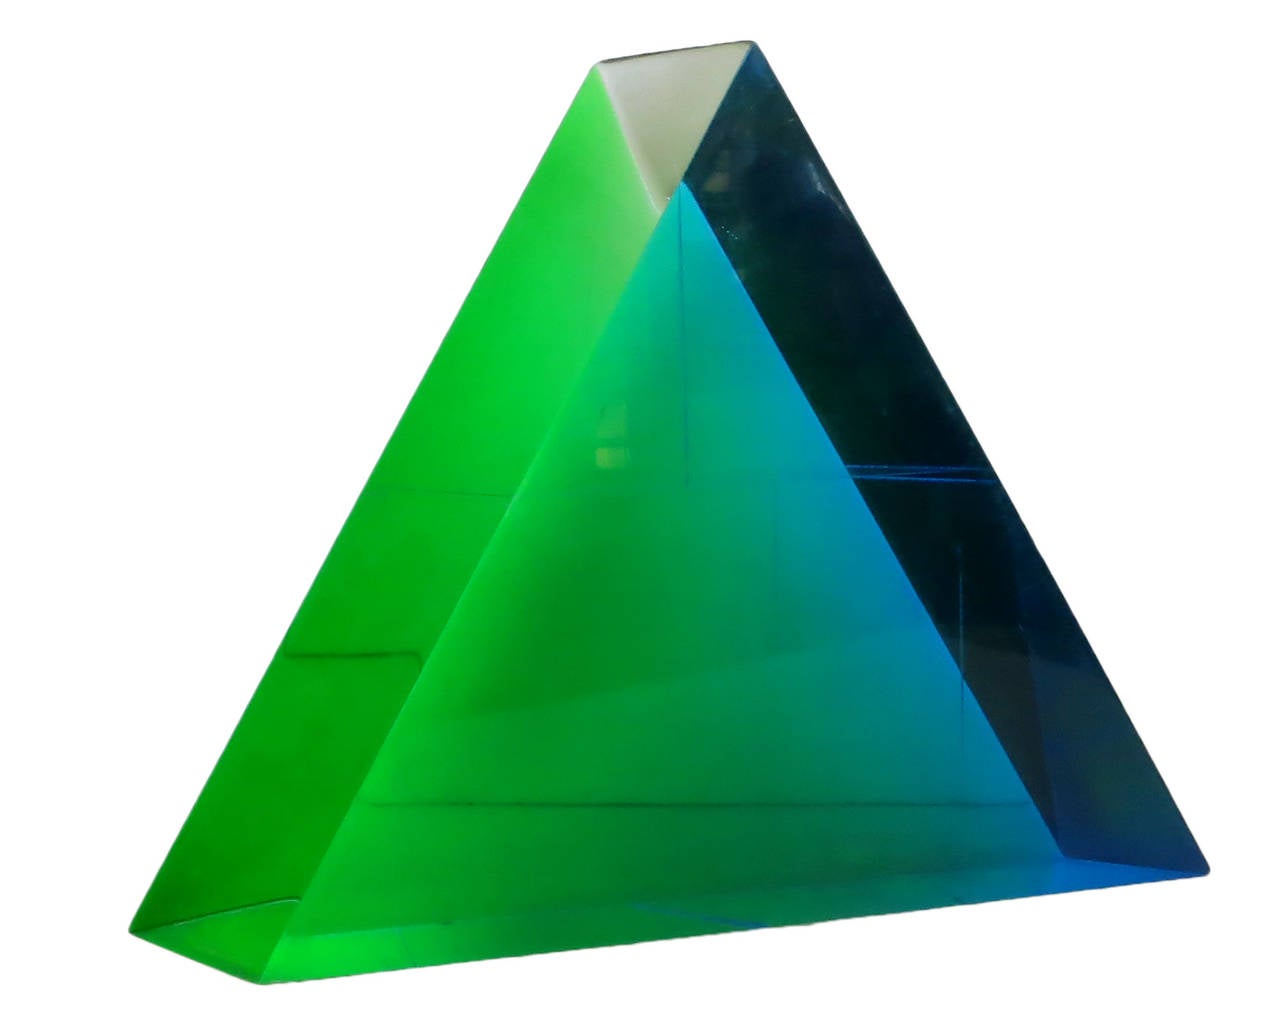 A Vasa Mihich laminated acrylic sculpture circa 1980, this piece has a two-toned triangular form that shifts in color depending on the viewing angle. 

Mihich is an academically trained painter and a senior Professor of Design at the University of